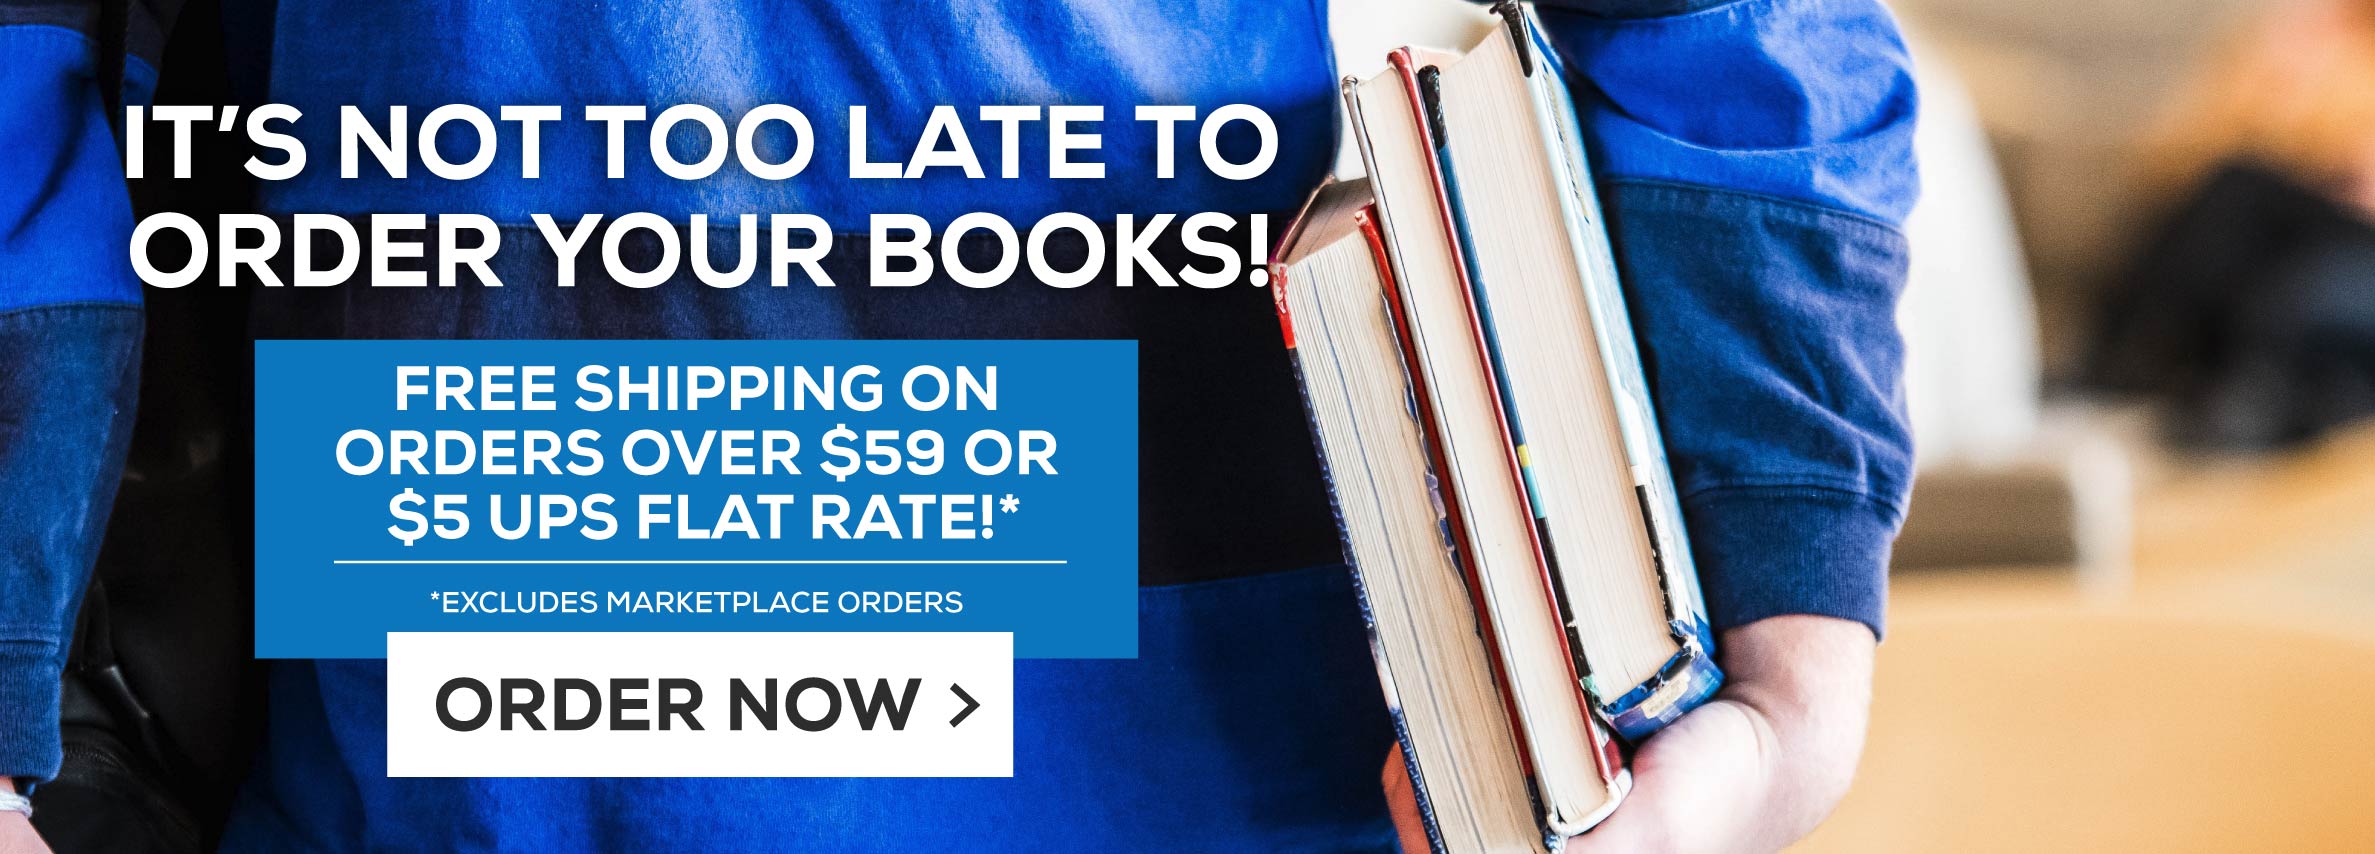 It's Not Too Late to Order Your Books! - Free Shipping on Orders Over $59 or $5 UPS Flat Rate* - Excludes Marketplace Orders - Order Now